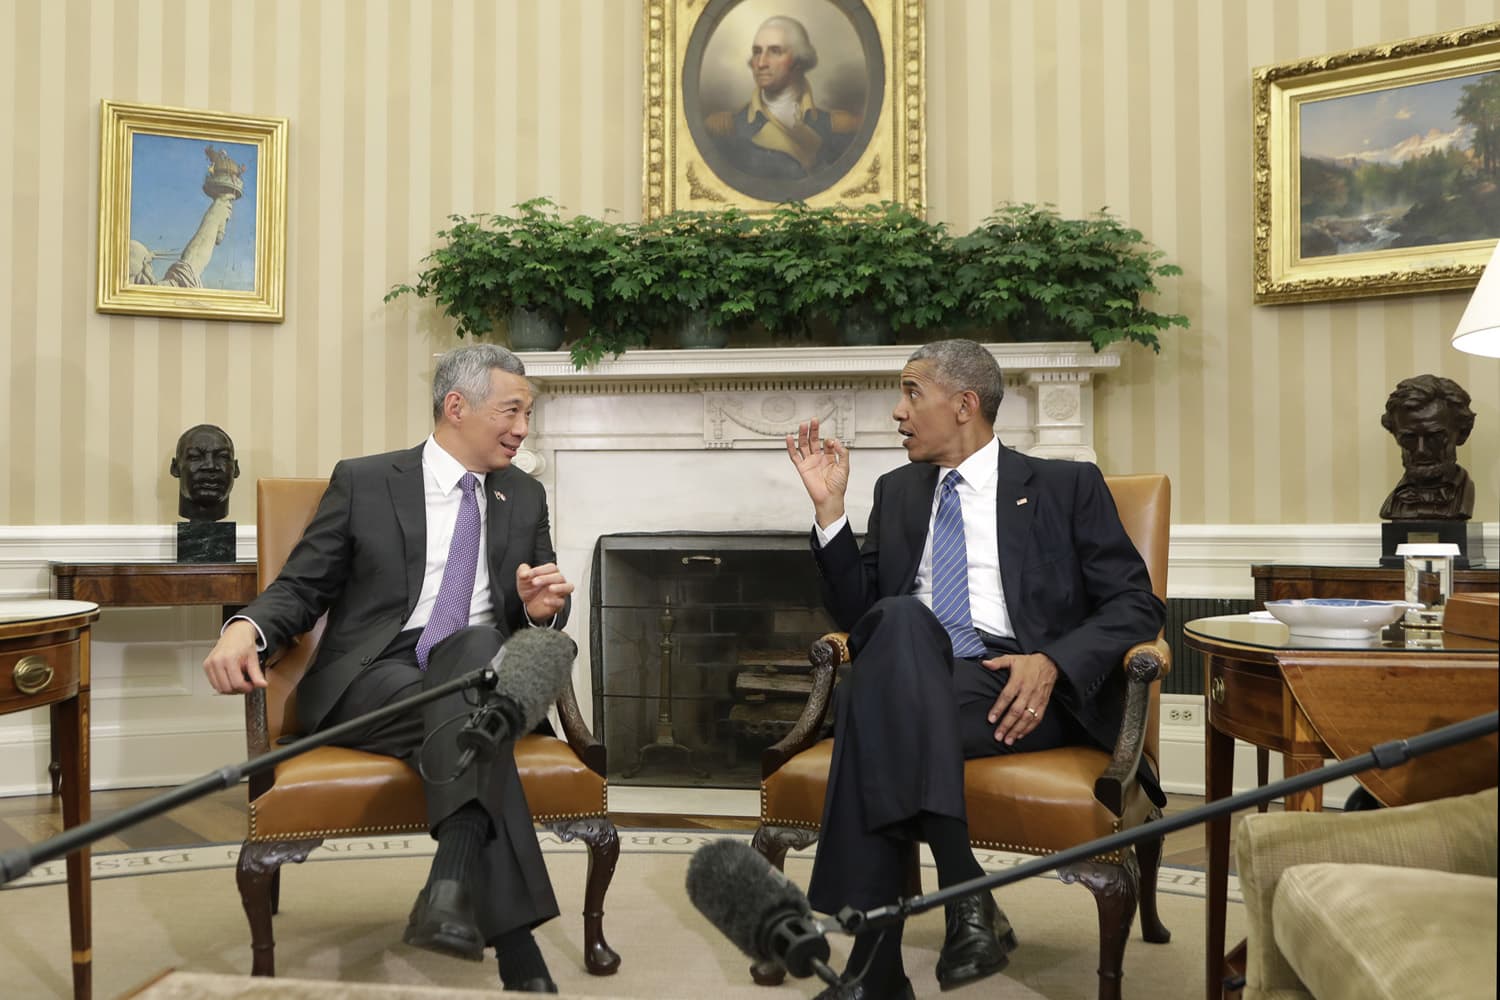 President Barack Obama meets with Singapore's Prime Minister Lee Hsien Loong in the Oval Office of the White House in Washington. (Manuel Balce Ceneta/AP)